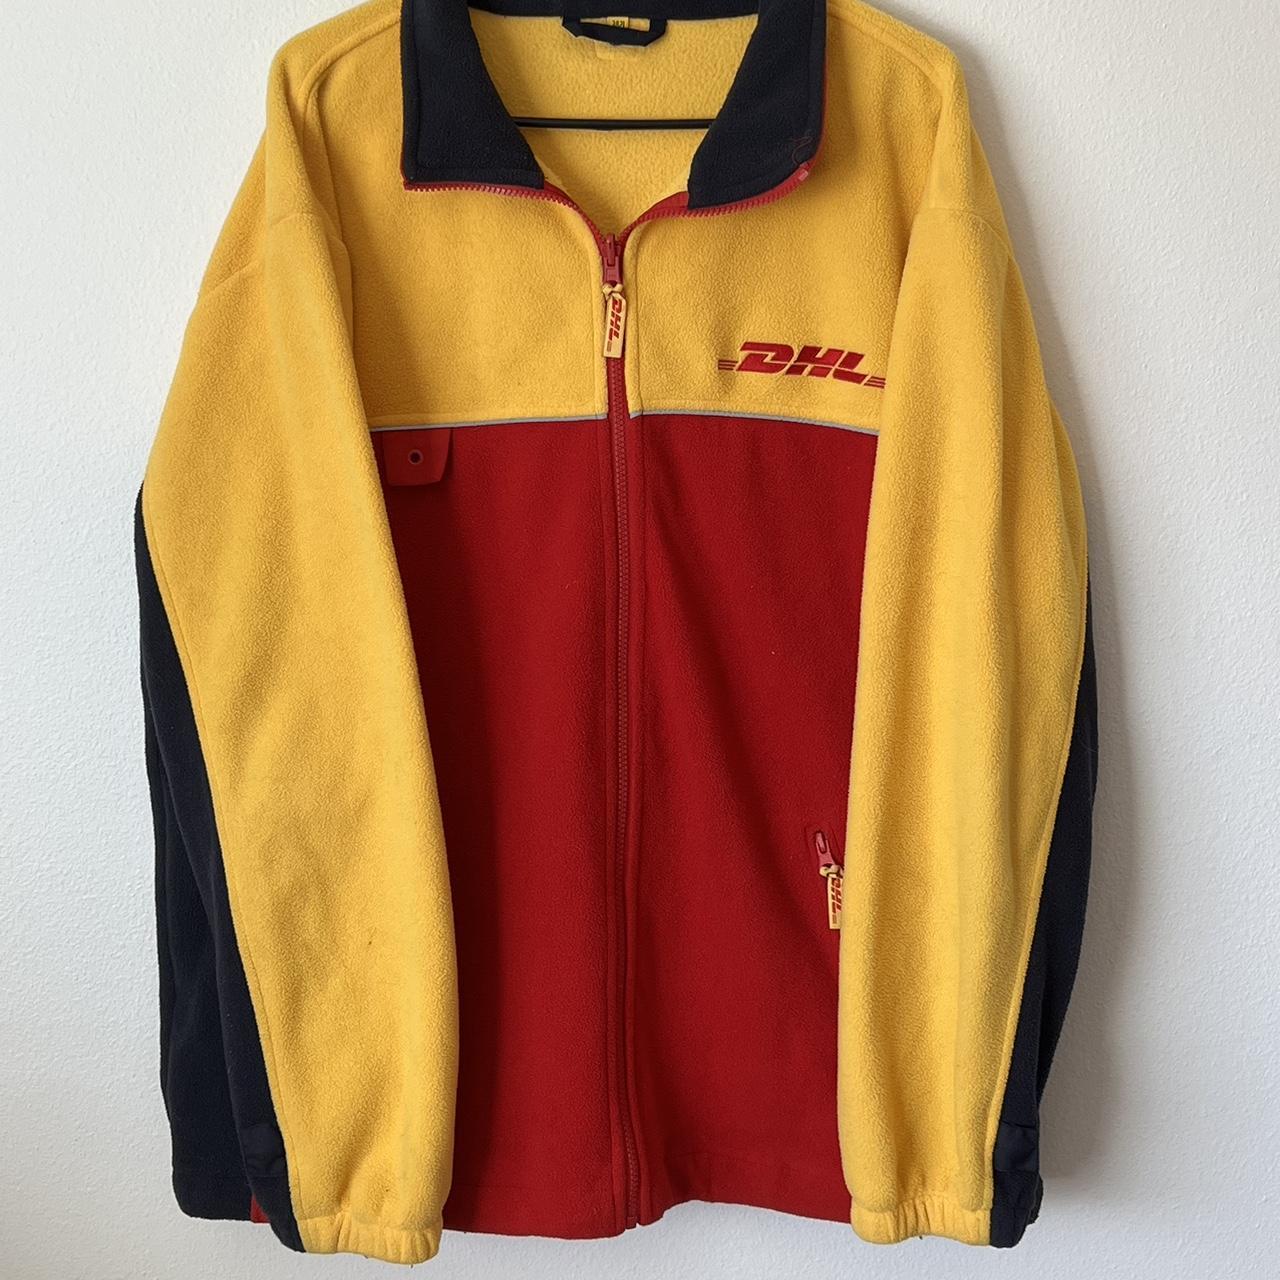 Sweet DHL fleece with cool zippers and embroidery... - Depop